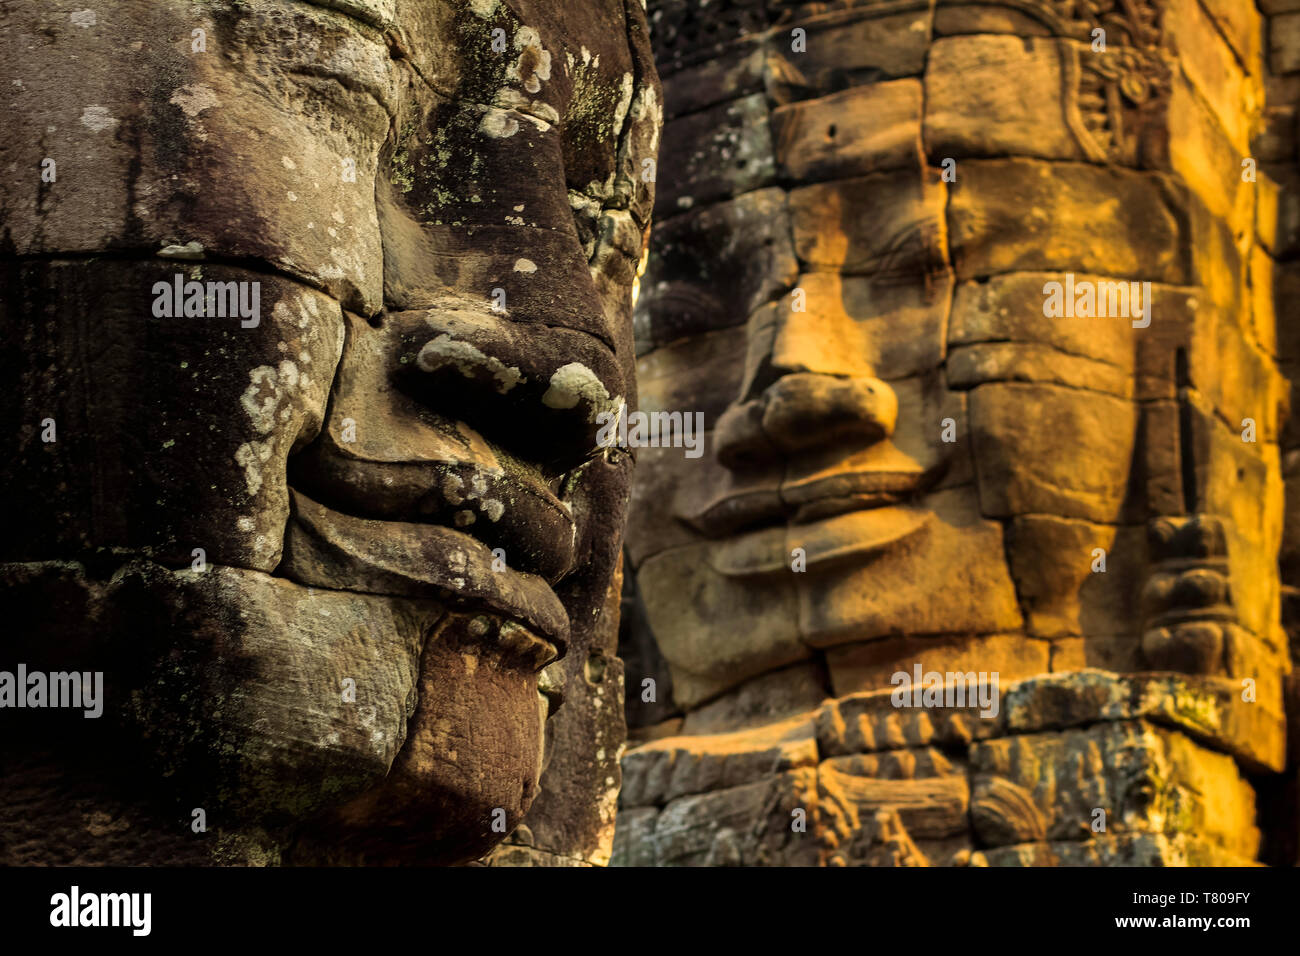 T wo of 216 smiling sandstone faces at 12th century Bayon, King Jayavarman VII's last temple in Angkor Thom, Angkor, UNESCO, Siem Reap, Cambodia, Asia Stock Photo